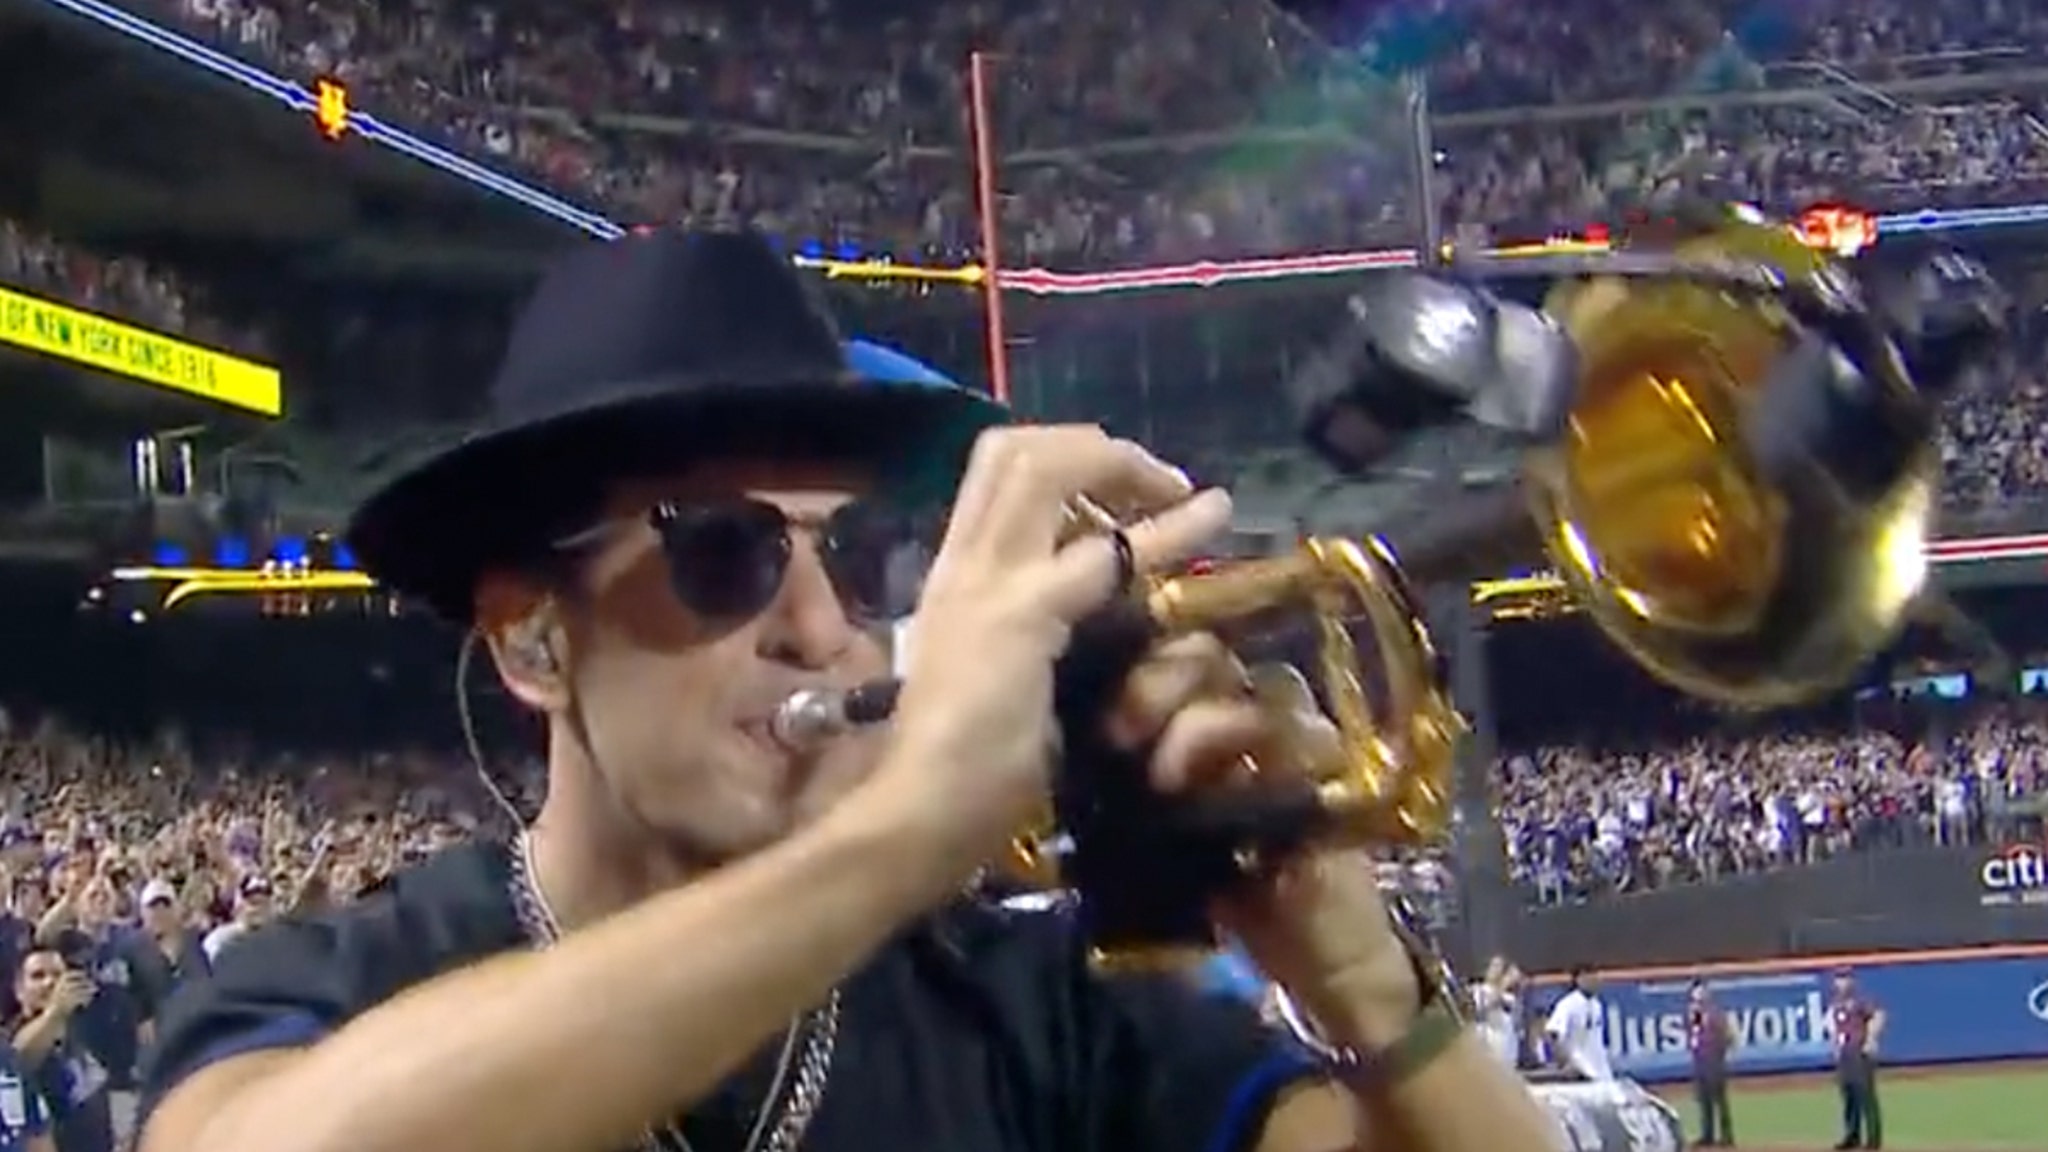 Timmy Trumpet Plays at Citi Field, Take Me Out to the Ballgame, Timmy  Trumpet style. 🎺, By New York Mets